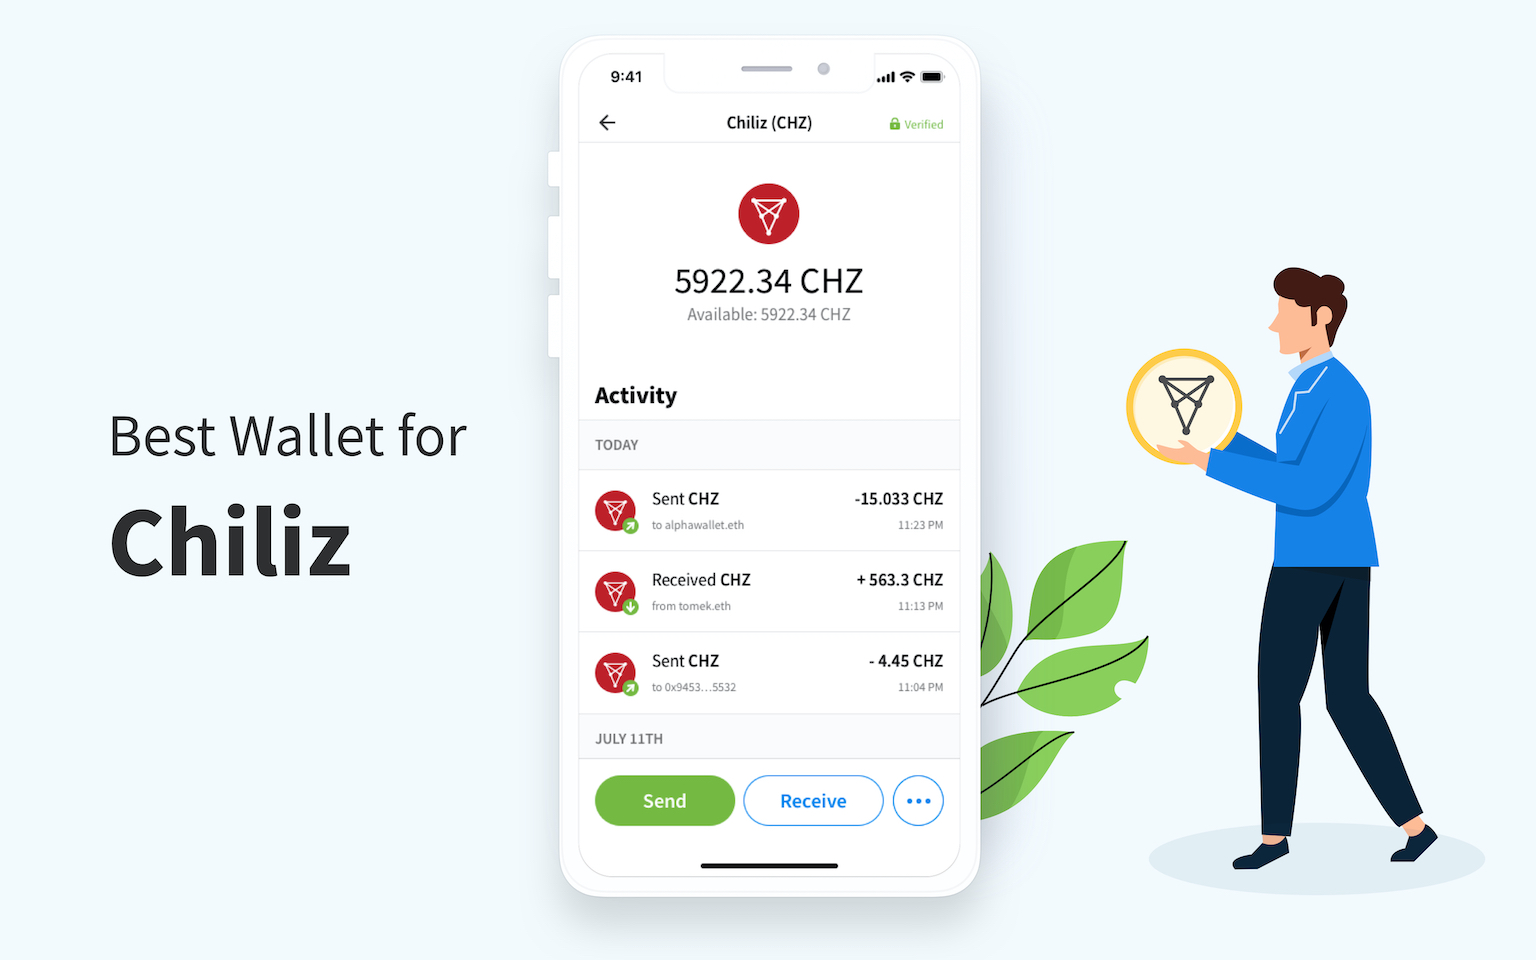 The Best Wallet for Chiliz